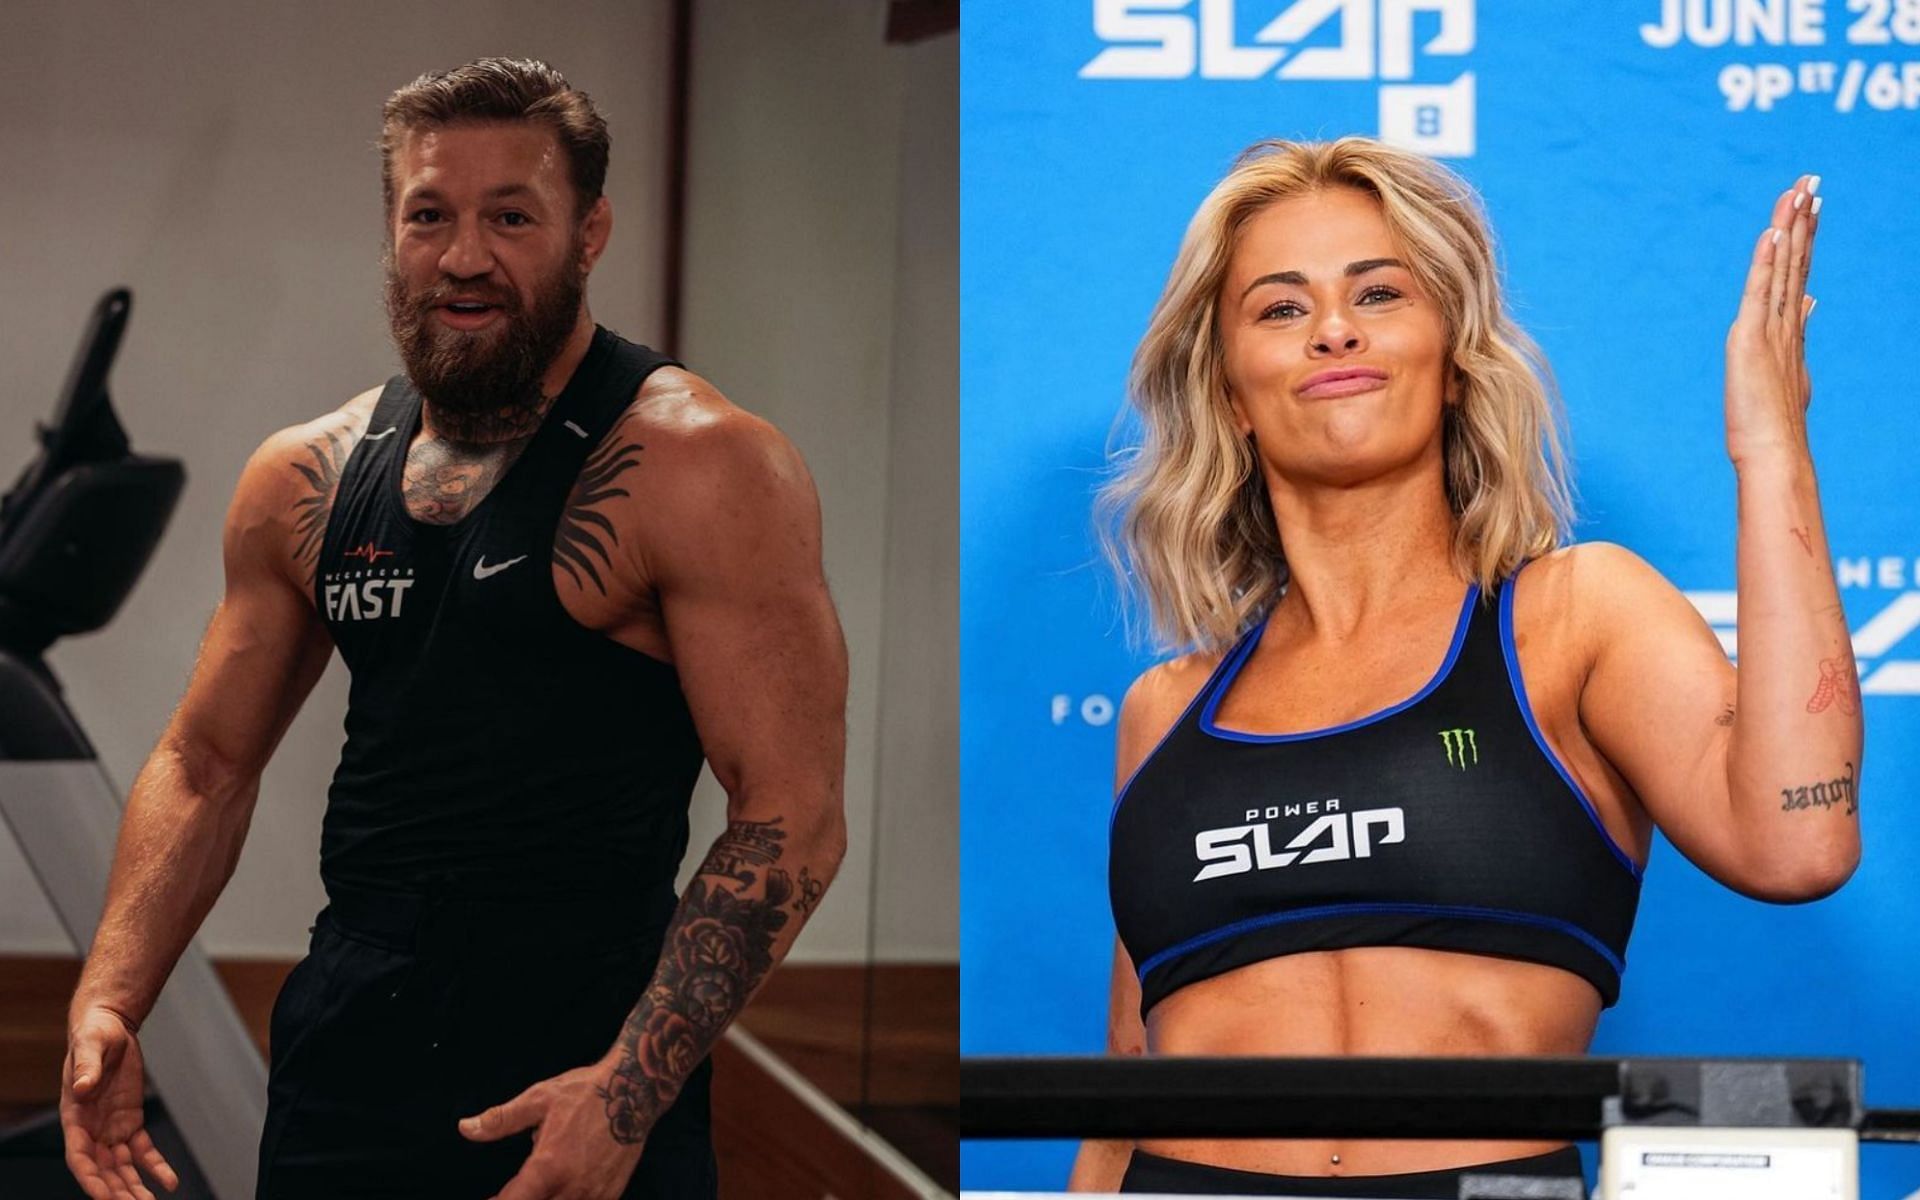 Conor McGregor (left) reacts to Paige VanZant (right) making her Power Slap debut. [Images courtesy: @thenotoriousmma and @paigevanzant on Instagram]